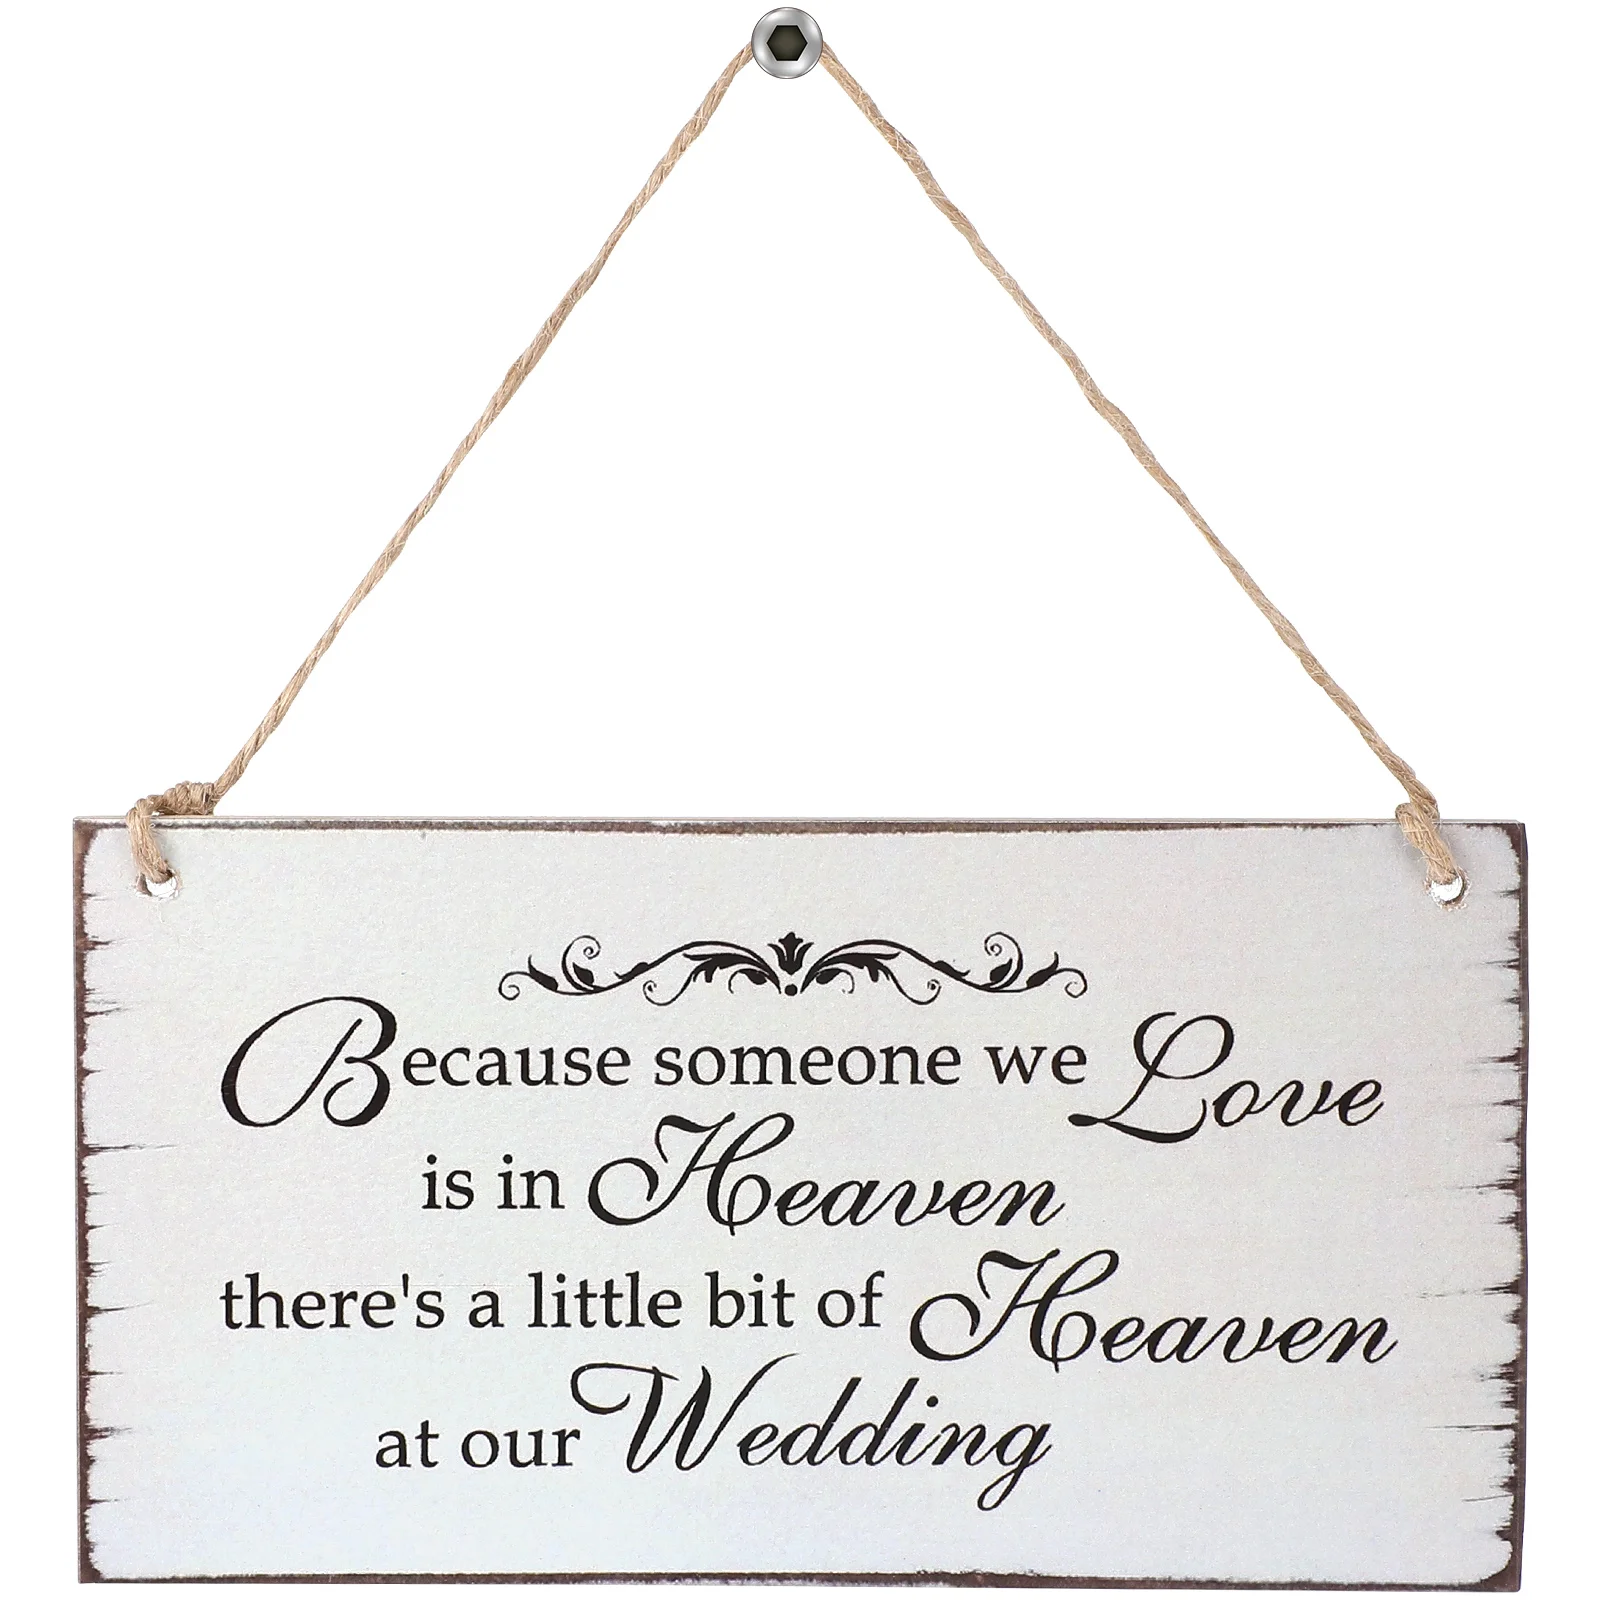 

Wedding Sign Signs Hangingheavenplaque Table Wood Someone Wooden Love Memory Because We Is Gifts Rustic Decorations Memorial